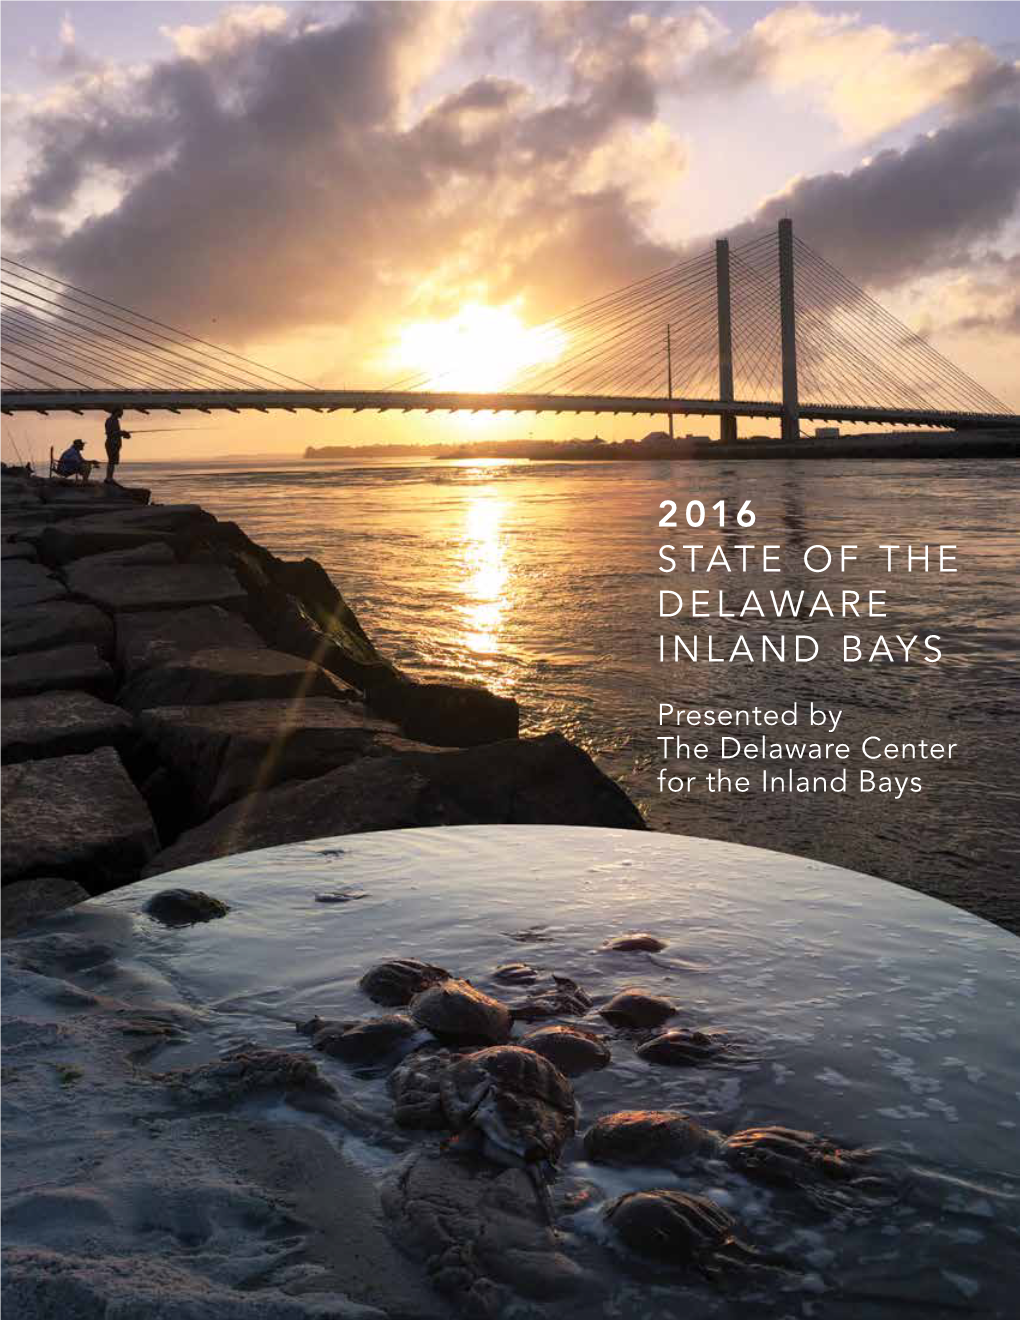 The 2016 State of the Delaware Inland Bays Report Is a Compilation of the Atlantic Ocean